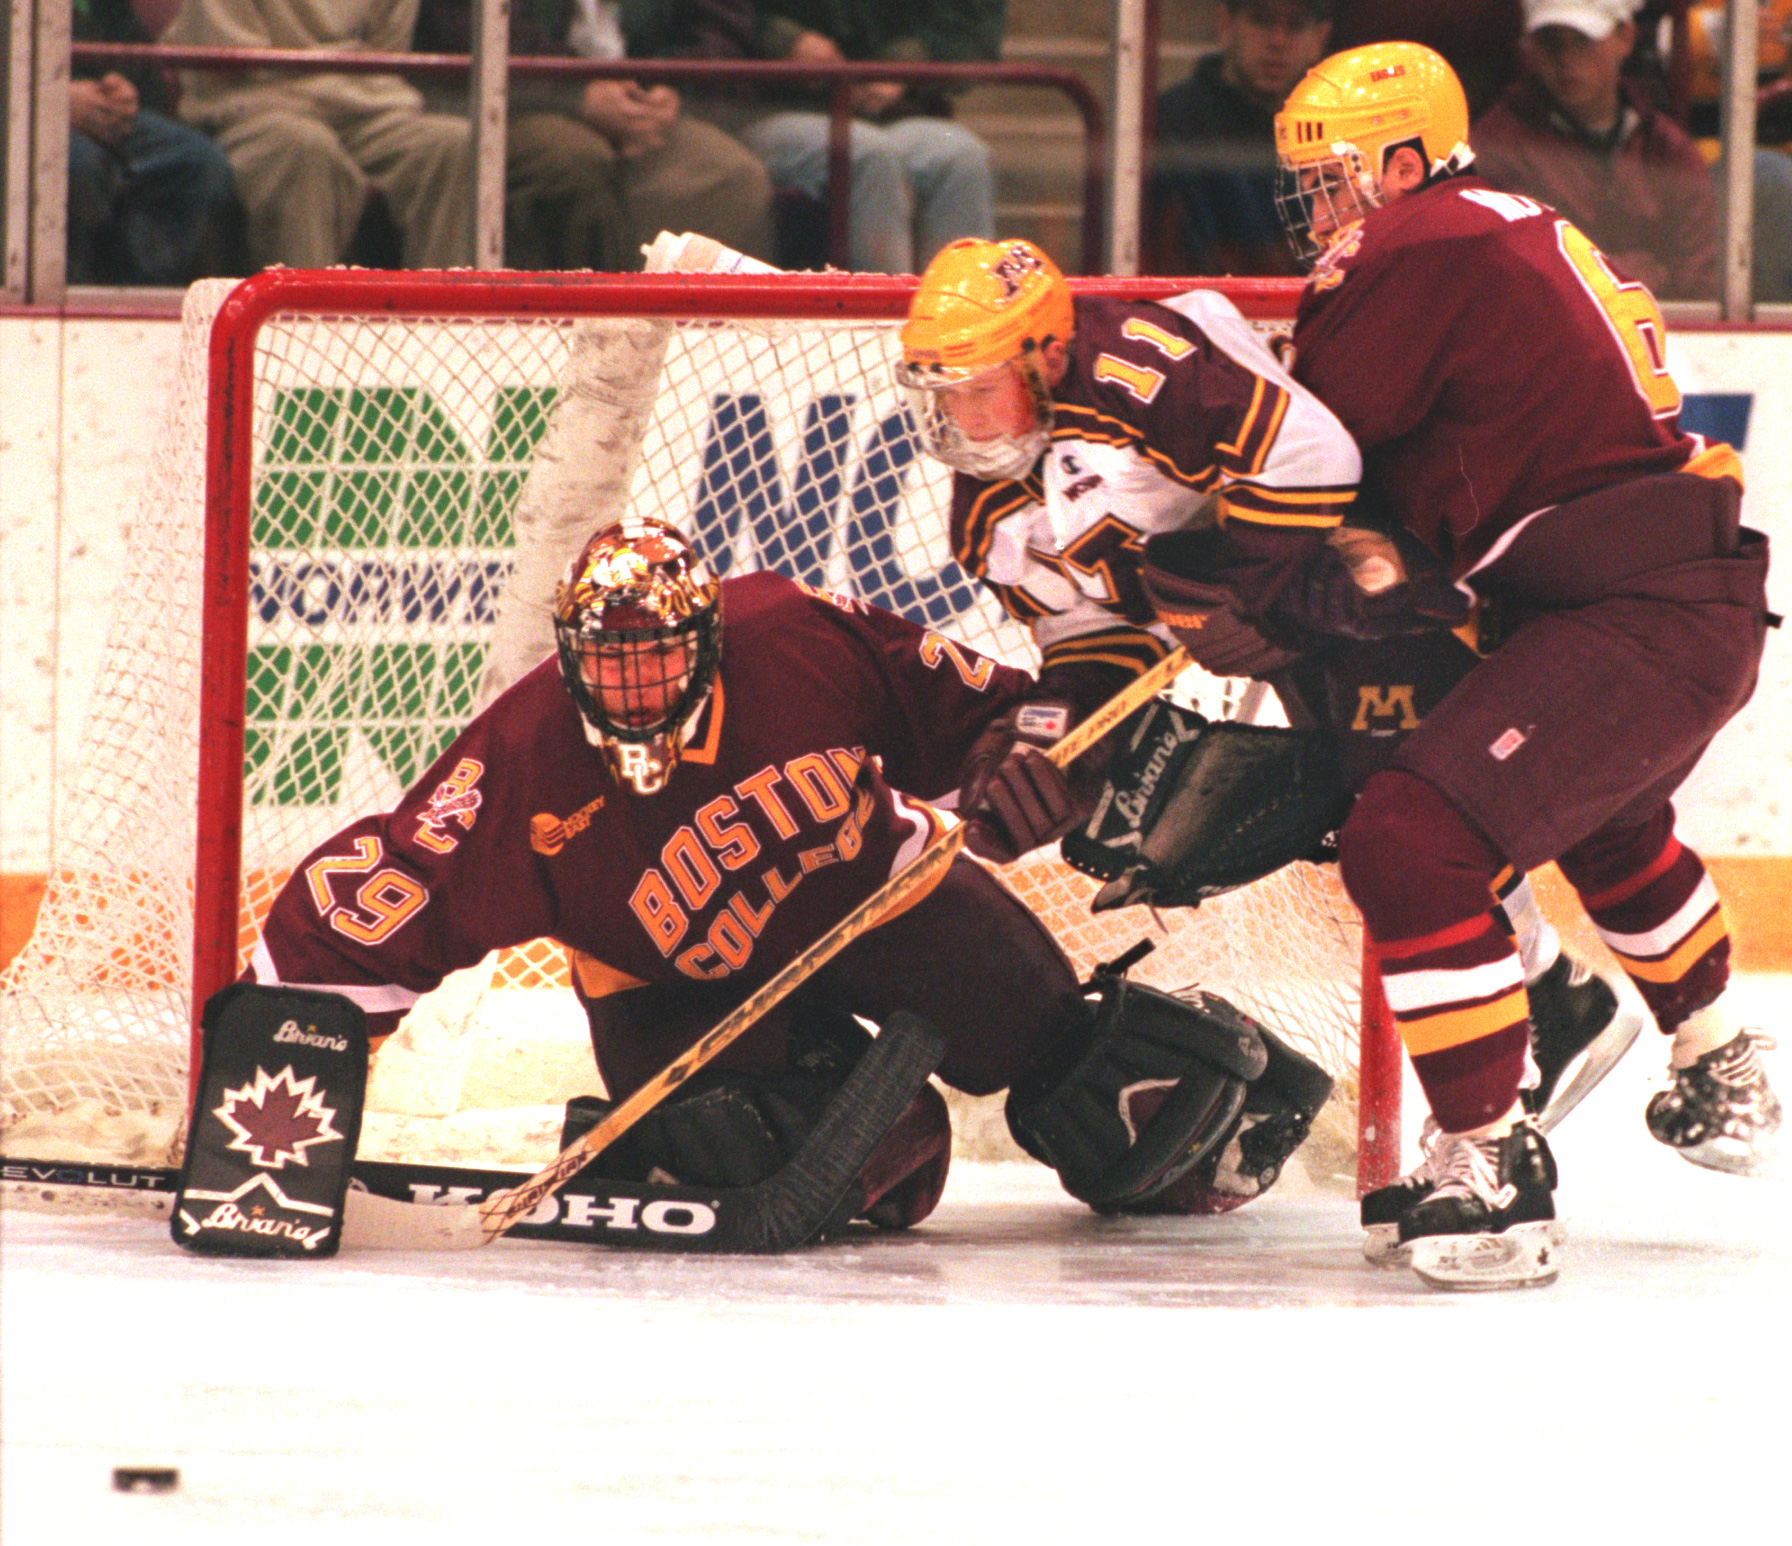 The Gopher’s Dave Spehar gets the squeeze put on him by Boston College’s goalie Greg Taylor and Mike Mottau as Spehar attempts to ge to the puck ist period action at Marriuci.(Photo by MARLIN LEVISON/Star Tribune via Getty Images)